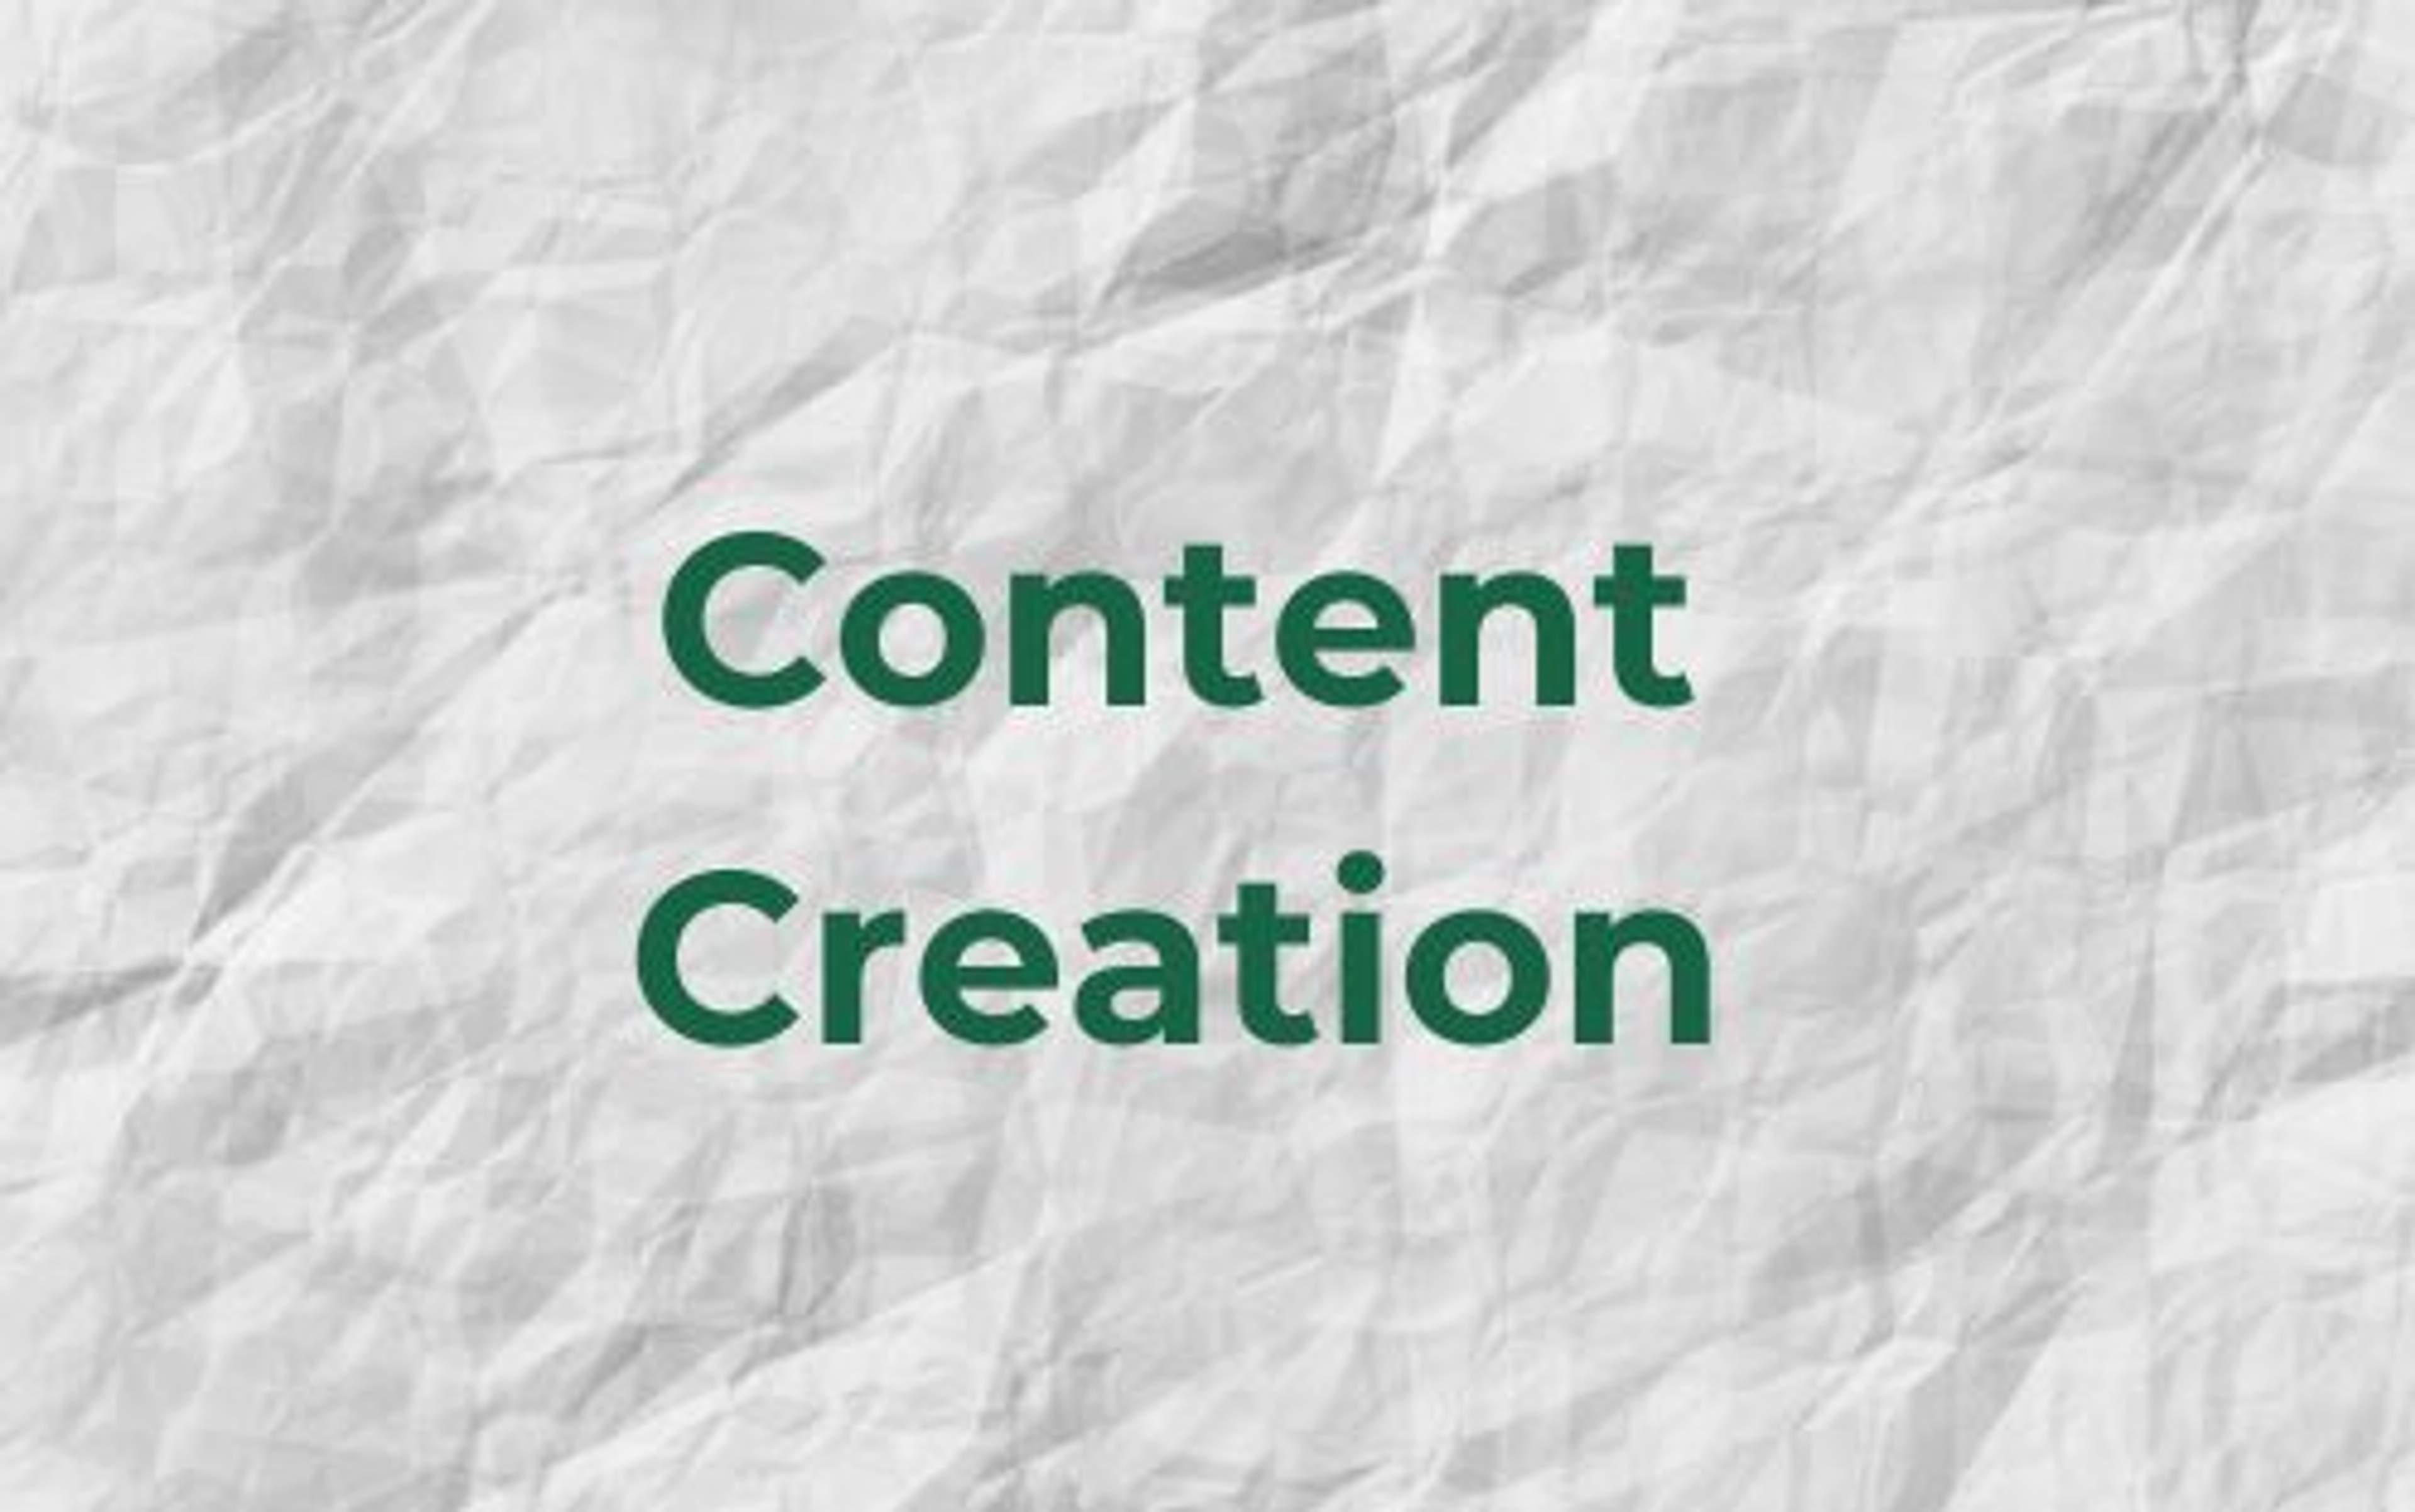 content creation and content writing services by savanna joy